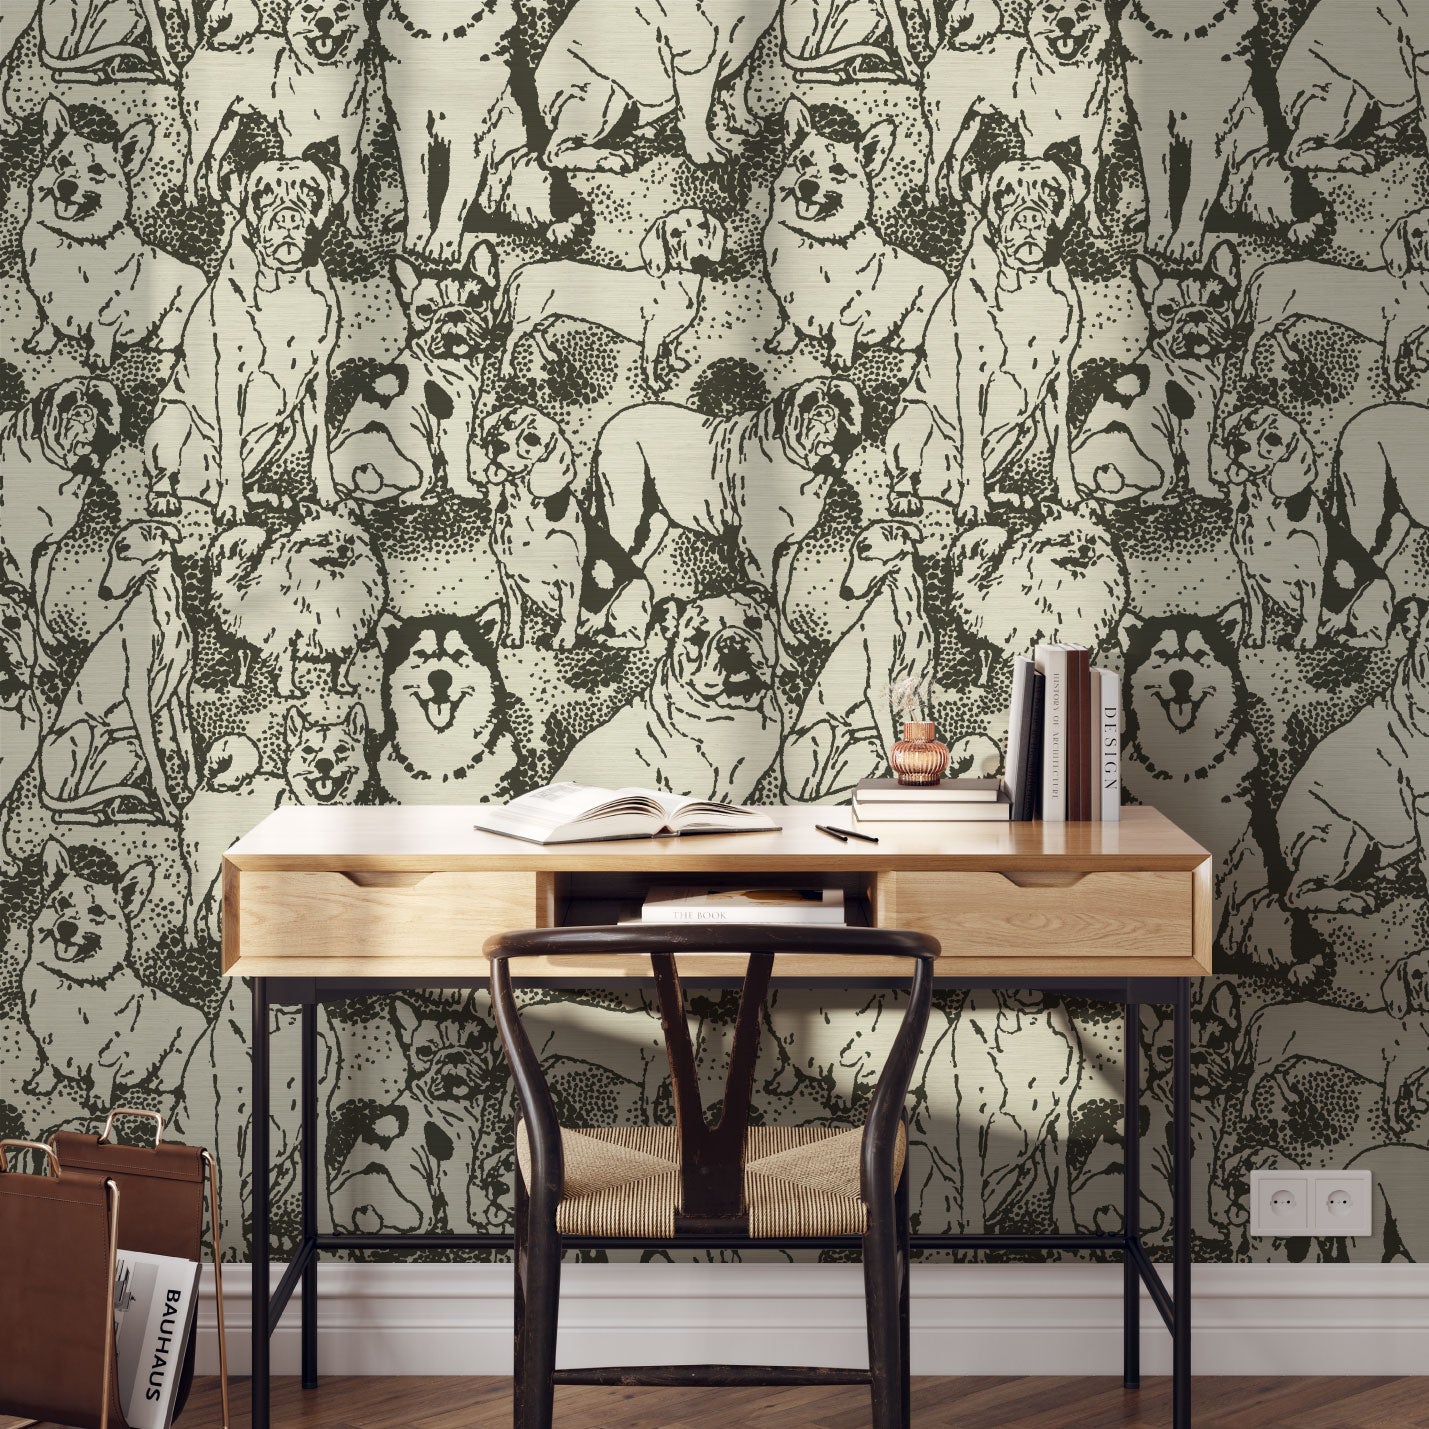 Load image into Gallery viewer, dog printed grasscloth wallpaper puppy huskie, bulldogs, mastiff, wiener, beagles, yorkie Natural Textured Eco-Friendly Non-toxic High-quality Sustainable Interior Design Bold Custom kids mudroom veterinary grooming animal neutral cream black white office study desk
